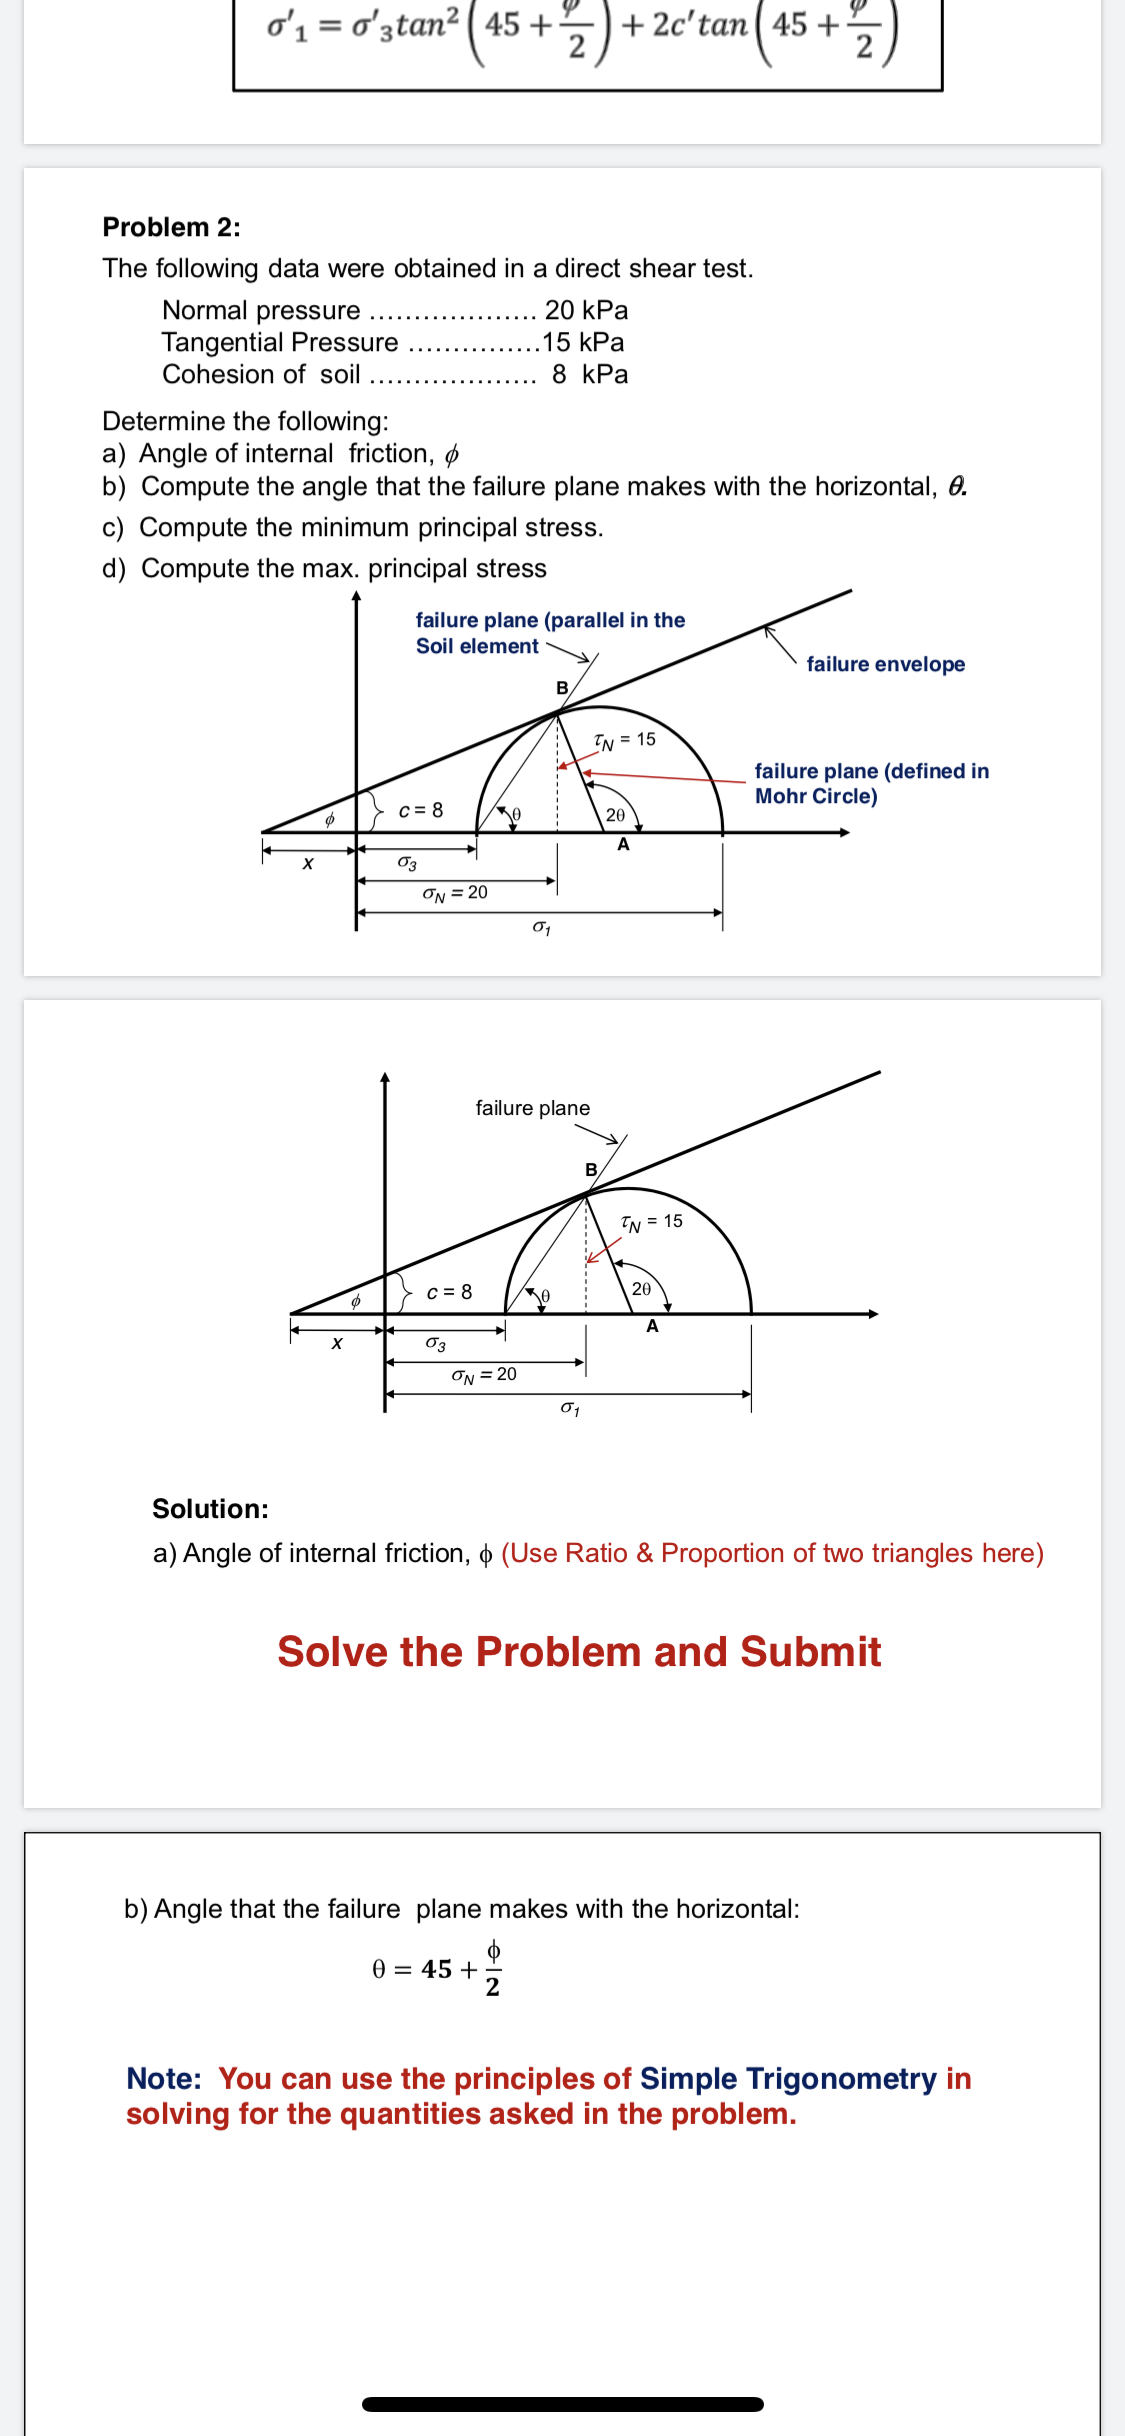 Problem 2:
The following data were obtained in a direct shear test.
... 20 kPa
Normal pressure ....
Tangential Pressure
Cohesion of soil
15 kPa
8 kPa
Determine the following:
a) Angle of internal friction, ø
b) Compute the angle that the failure plane makes with the horizontal, 0.
c) Compute the minimum principal stress.
d) Compute the max. principal stress
